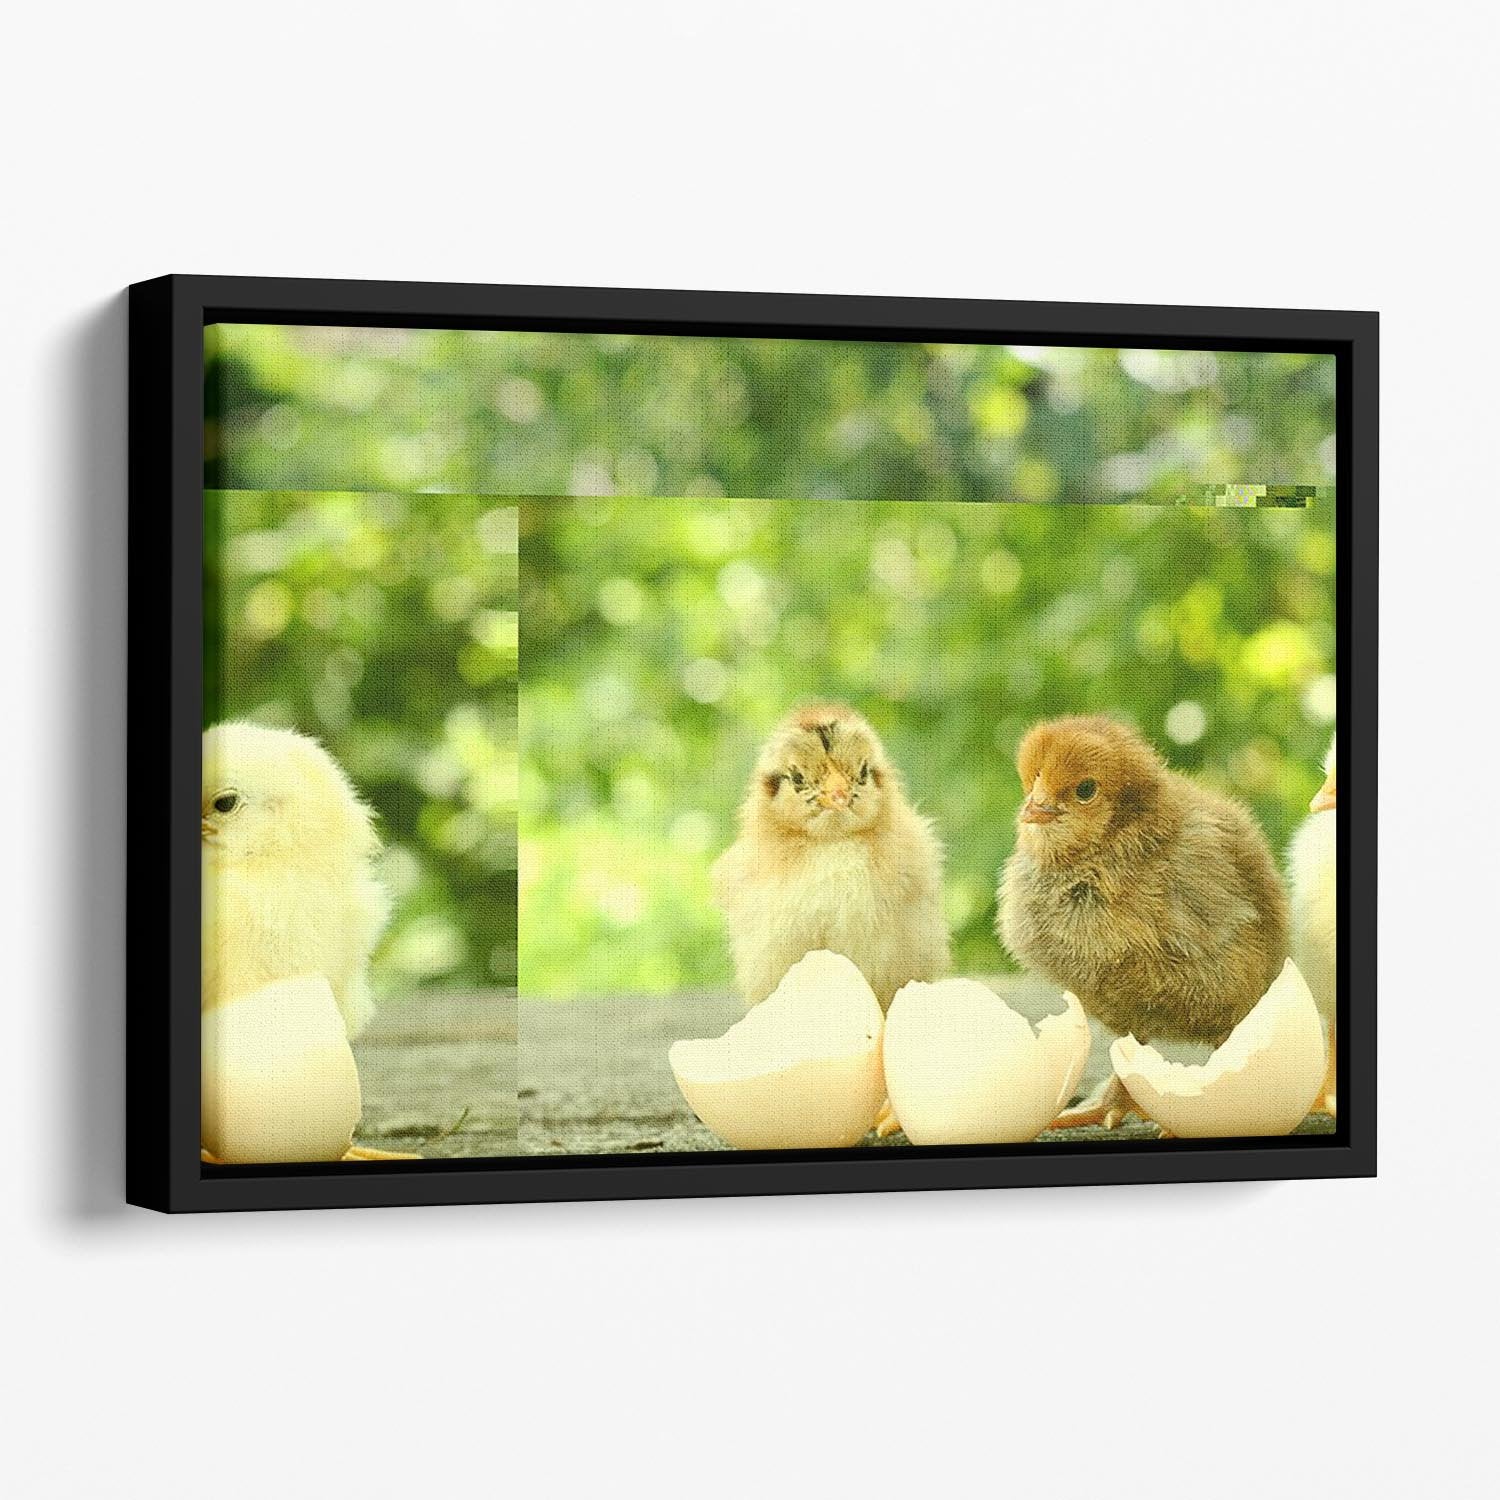 Small chicks and egg shells Floating Framed Canvas - Canvas Art Rocks - 1